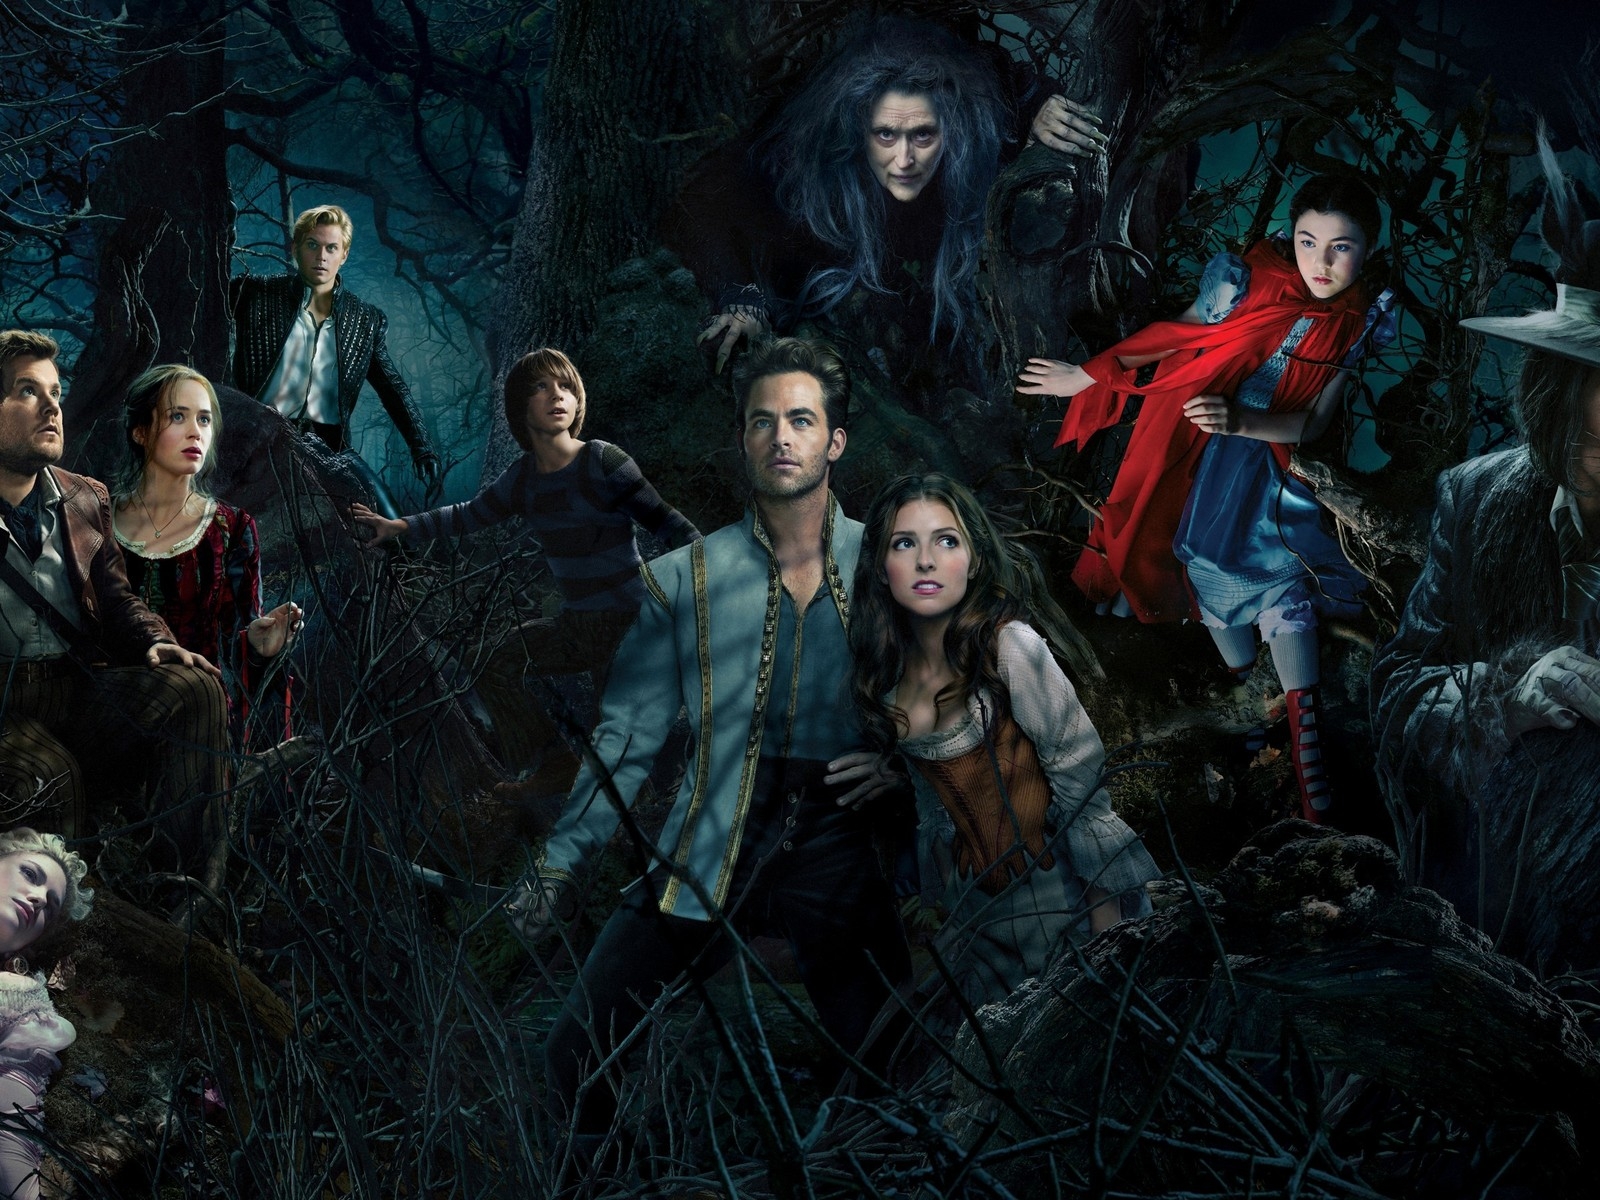 Into the Woods Poster for 1600 x 1200 resolution